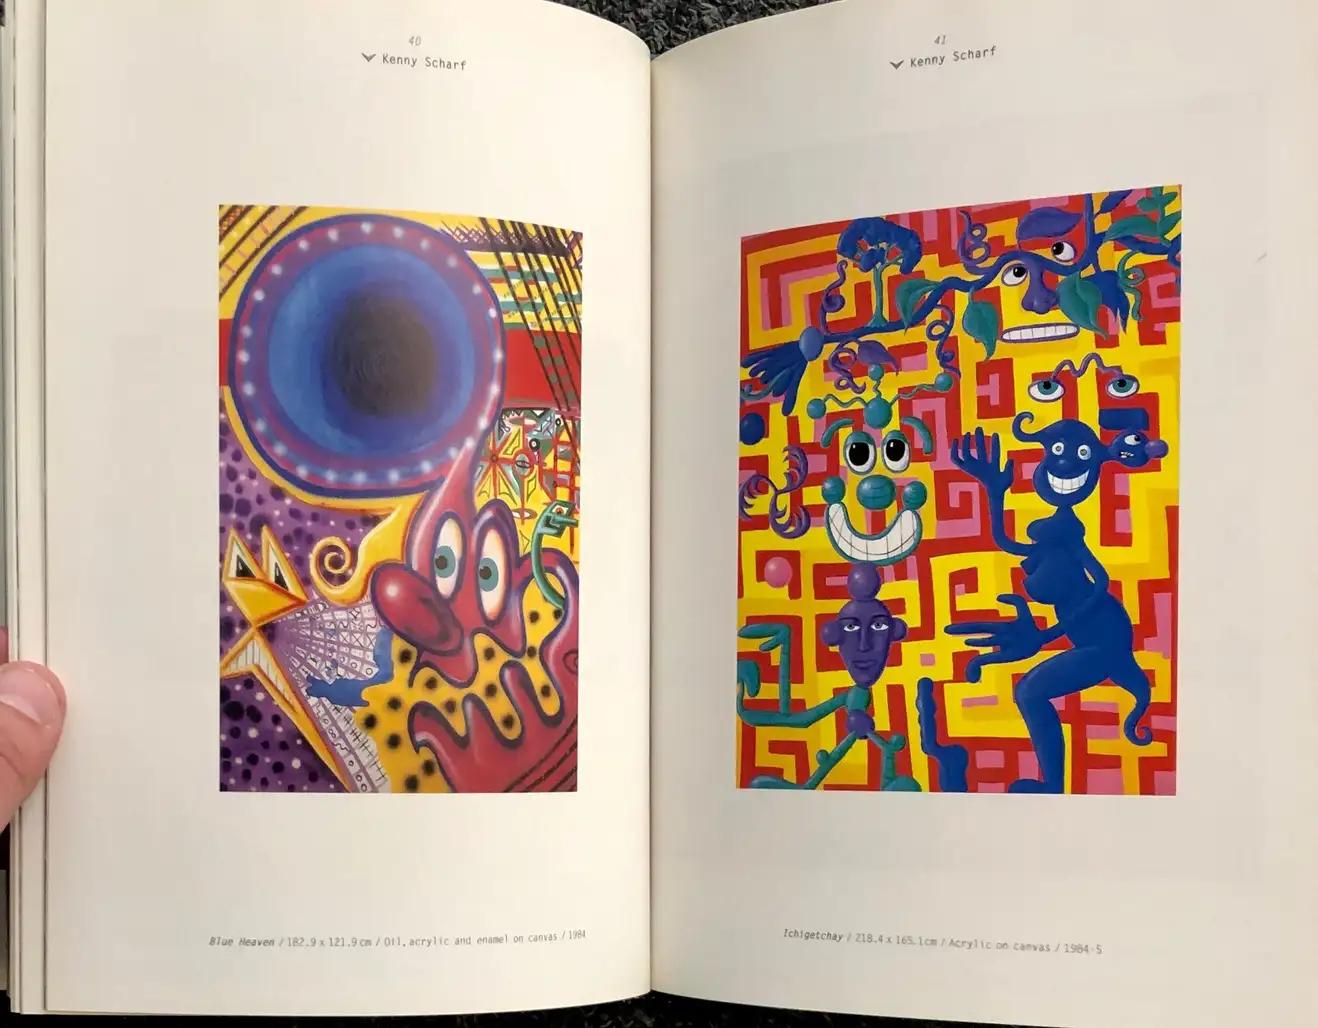 Basquiat Haring & Kenny Scharf at Lio Malca:
Rare sought after 1990s hardcover catalogue featuring works by Jean-Michel Basquiat, Keith Haring, & Kenny Scharf's from the Lio Malca collection

Hardcover exhibition catalog, 1998.
61 Pages.
Text: